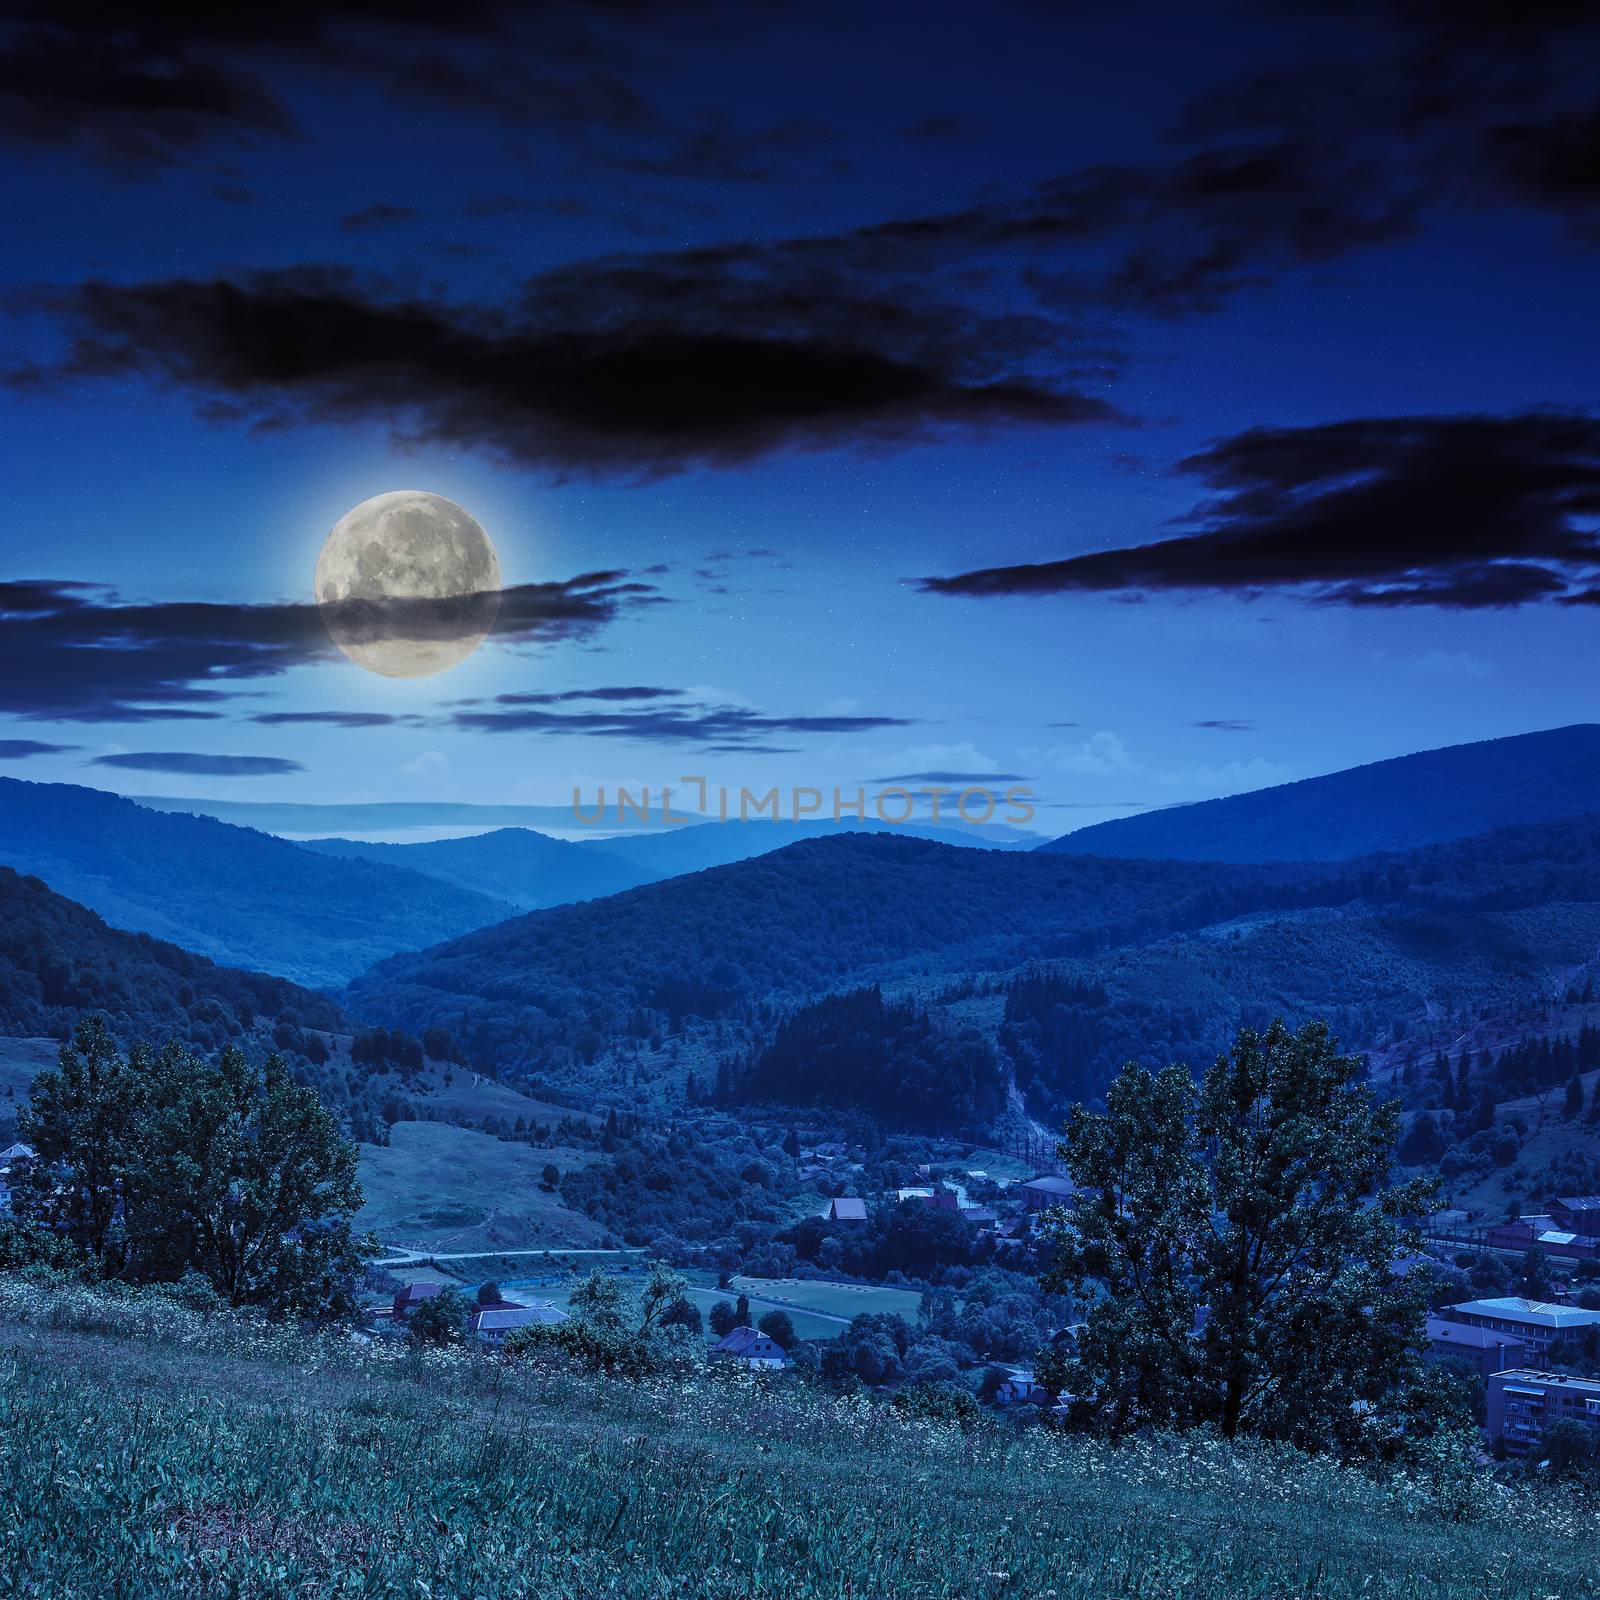 summer landscape. village at the foot of the mountain. forest and valley in mountain at night in moon light